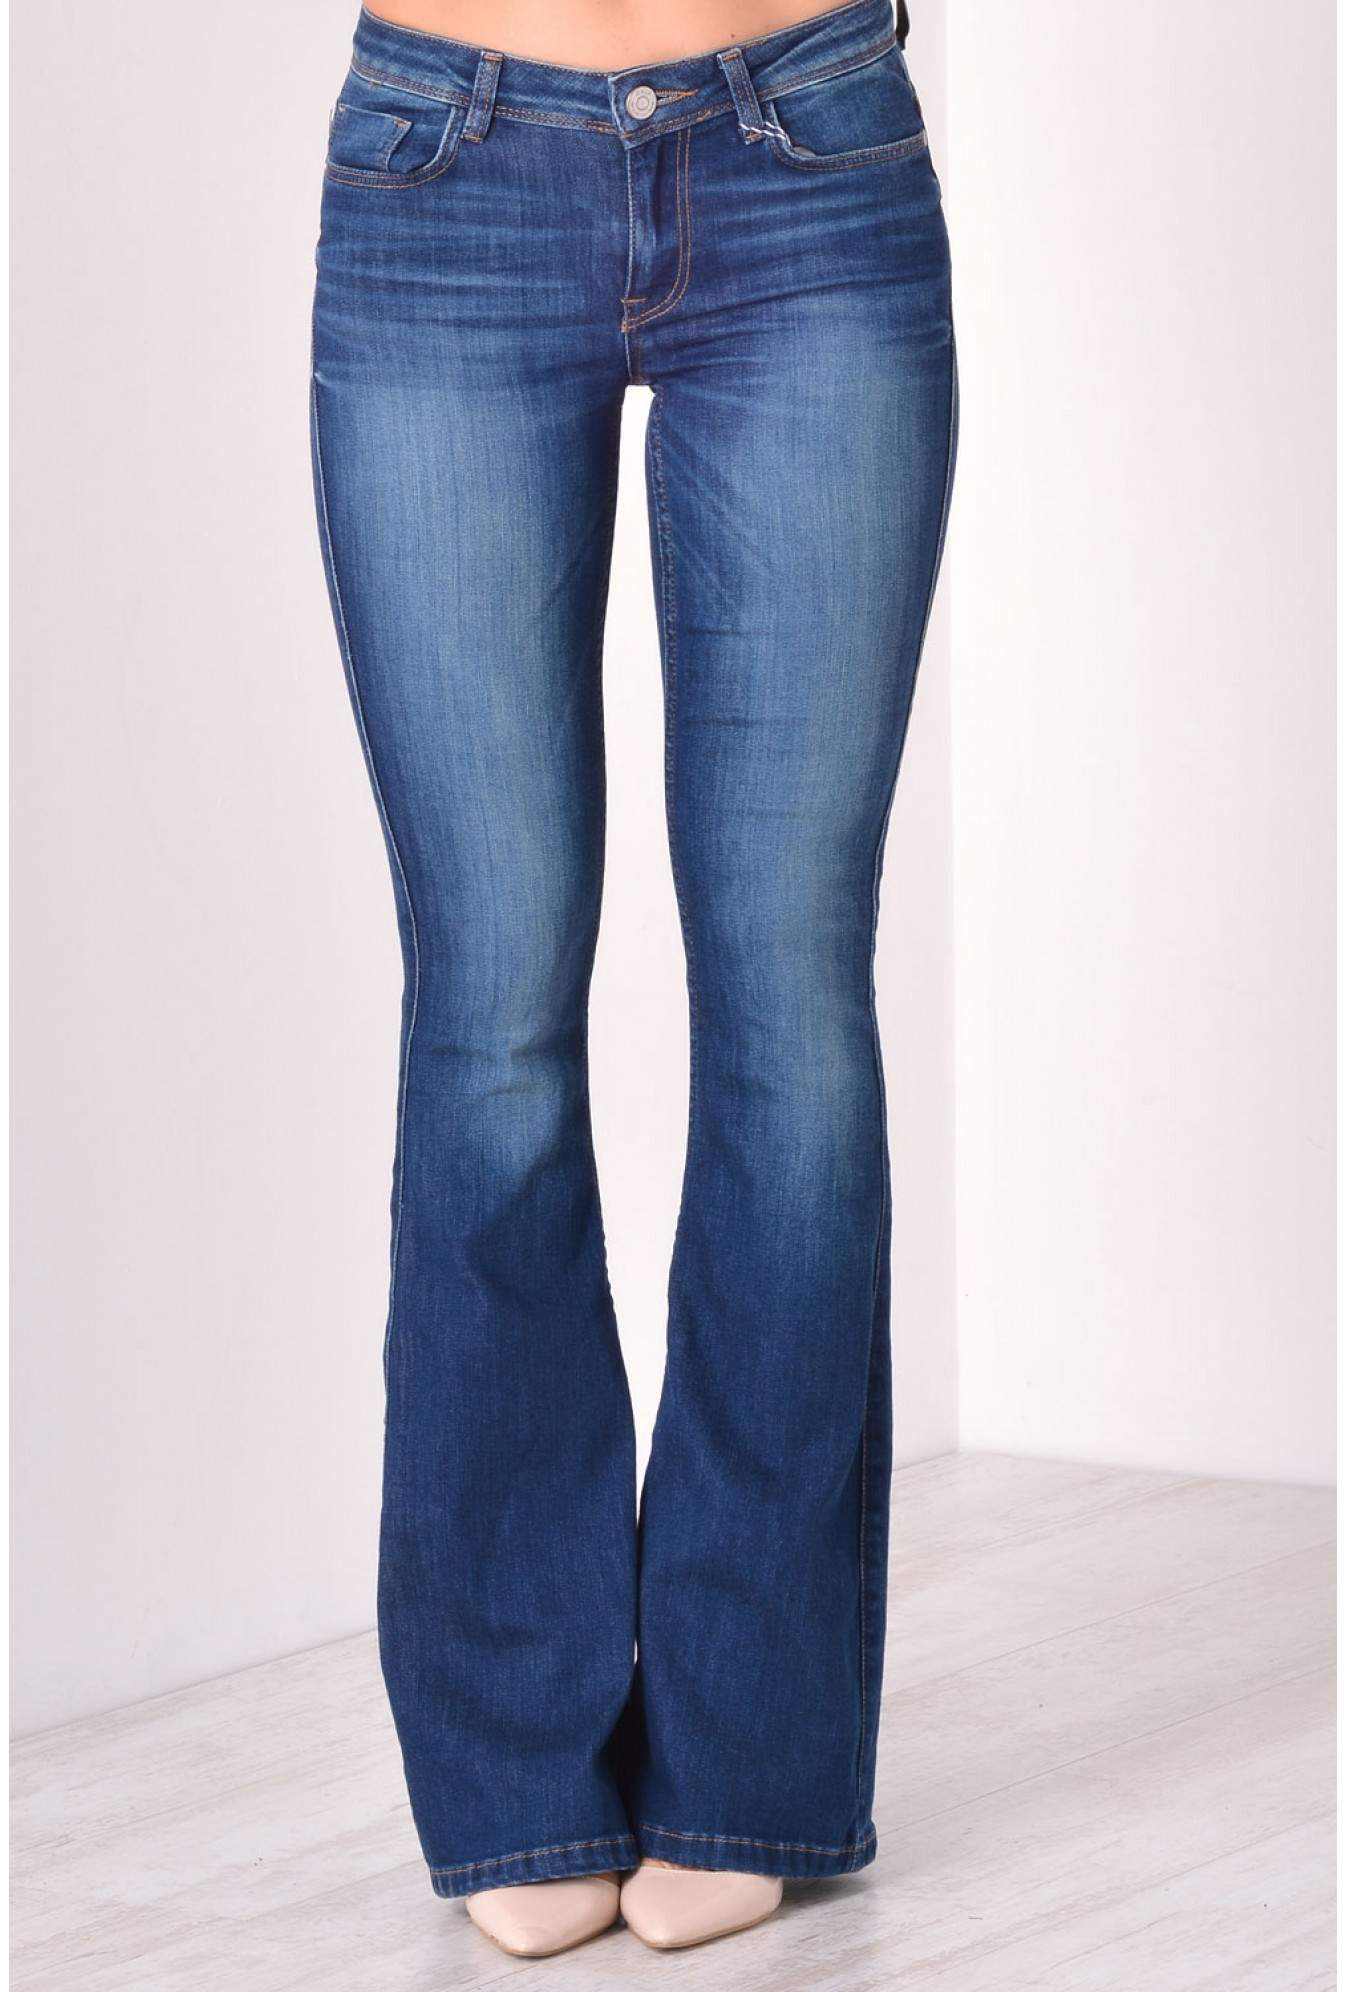 flare jeans in short length